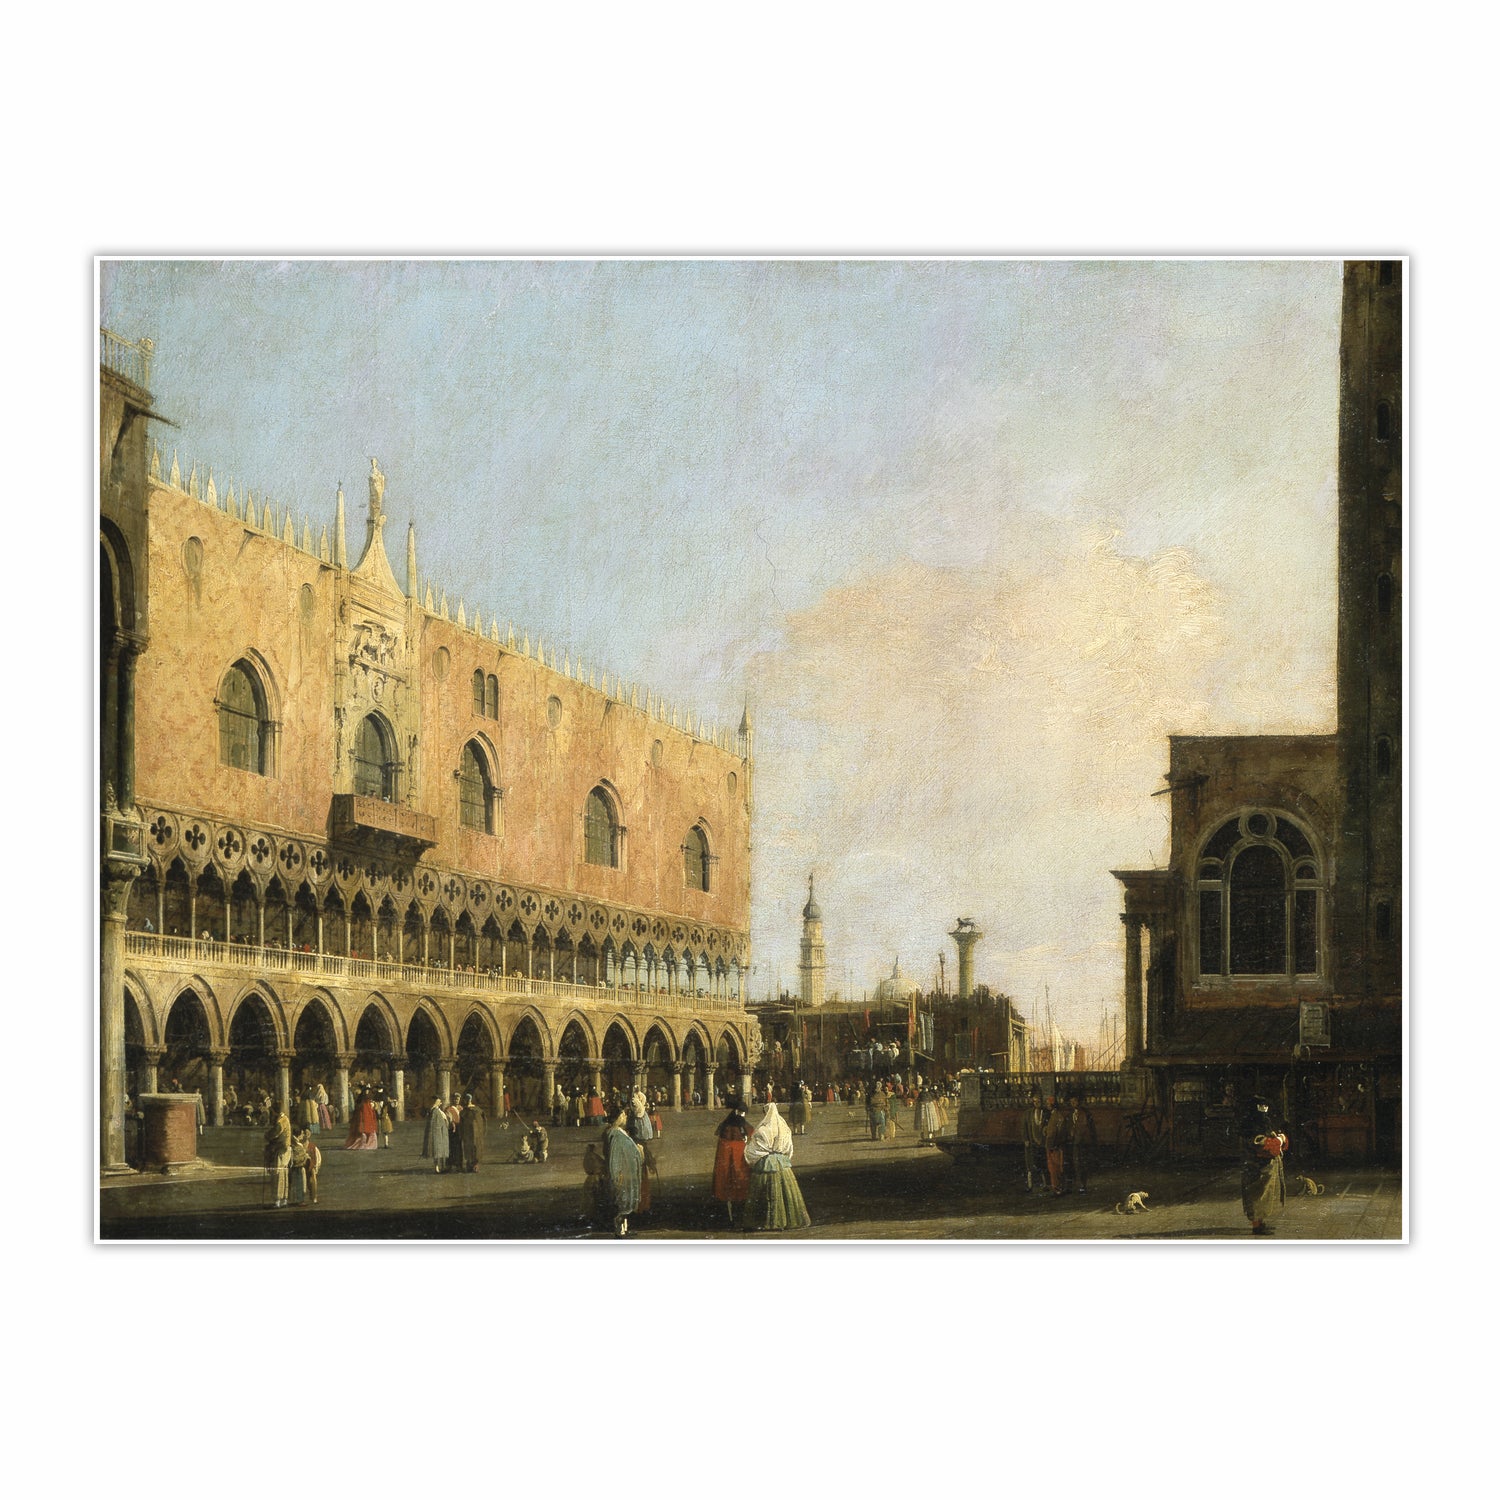 View of the Piazzetta San Marco Looking South